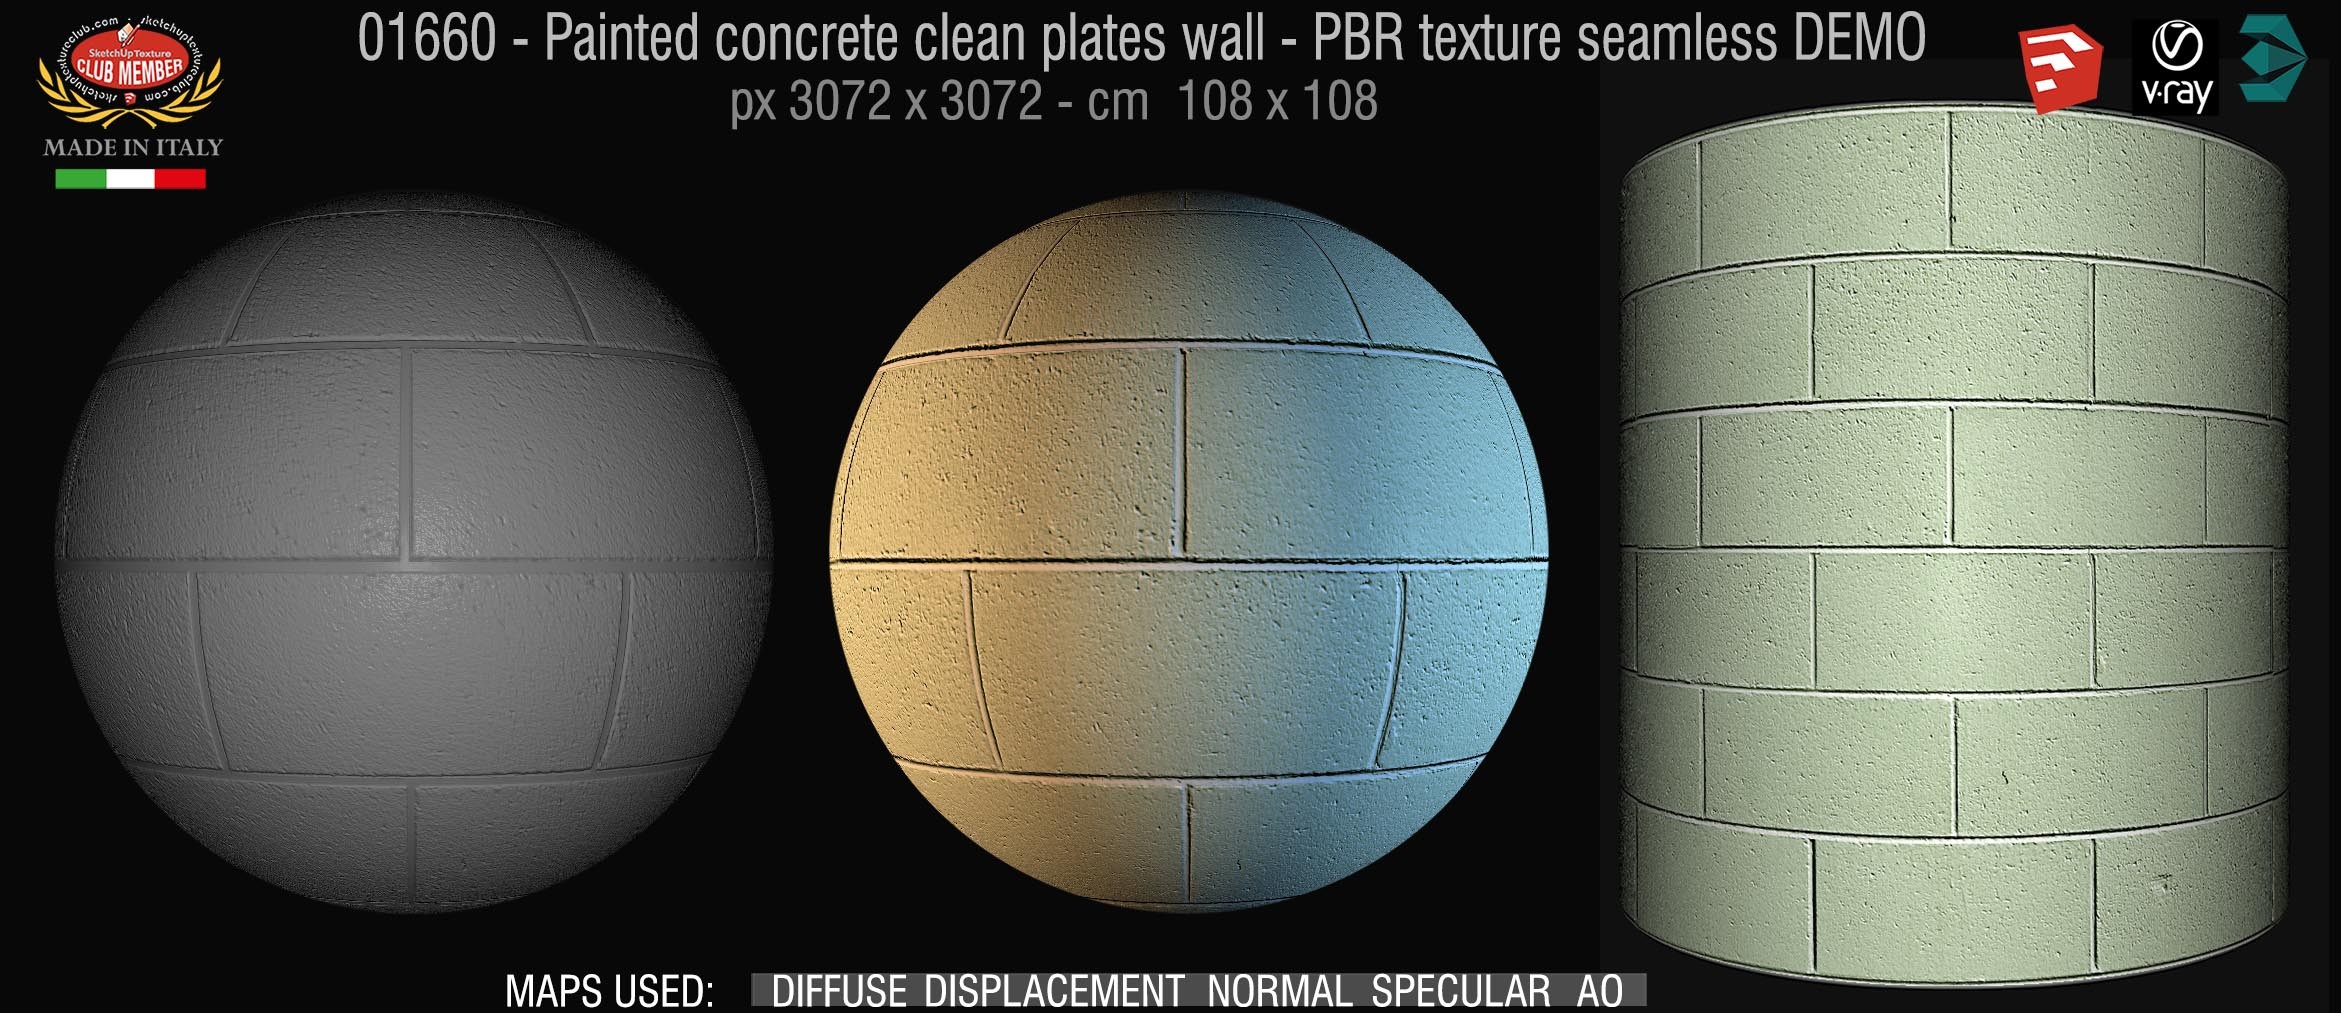 01660 Painted concrete clean plates wall PBR texture seamless DEMO